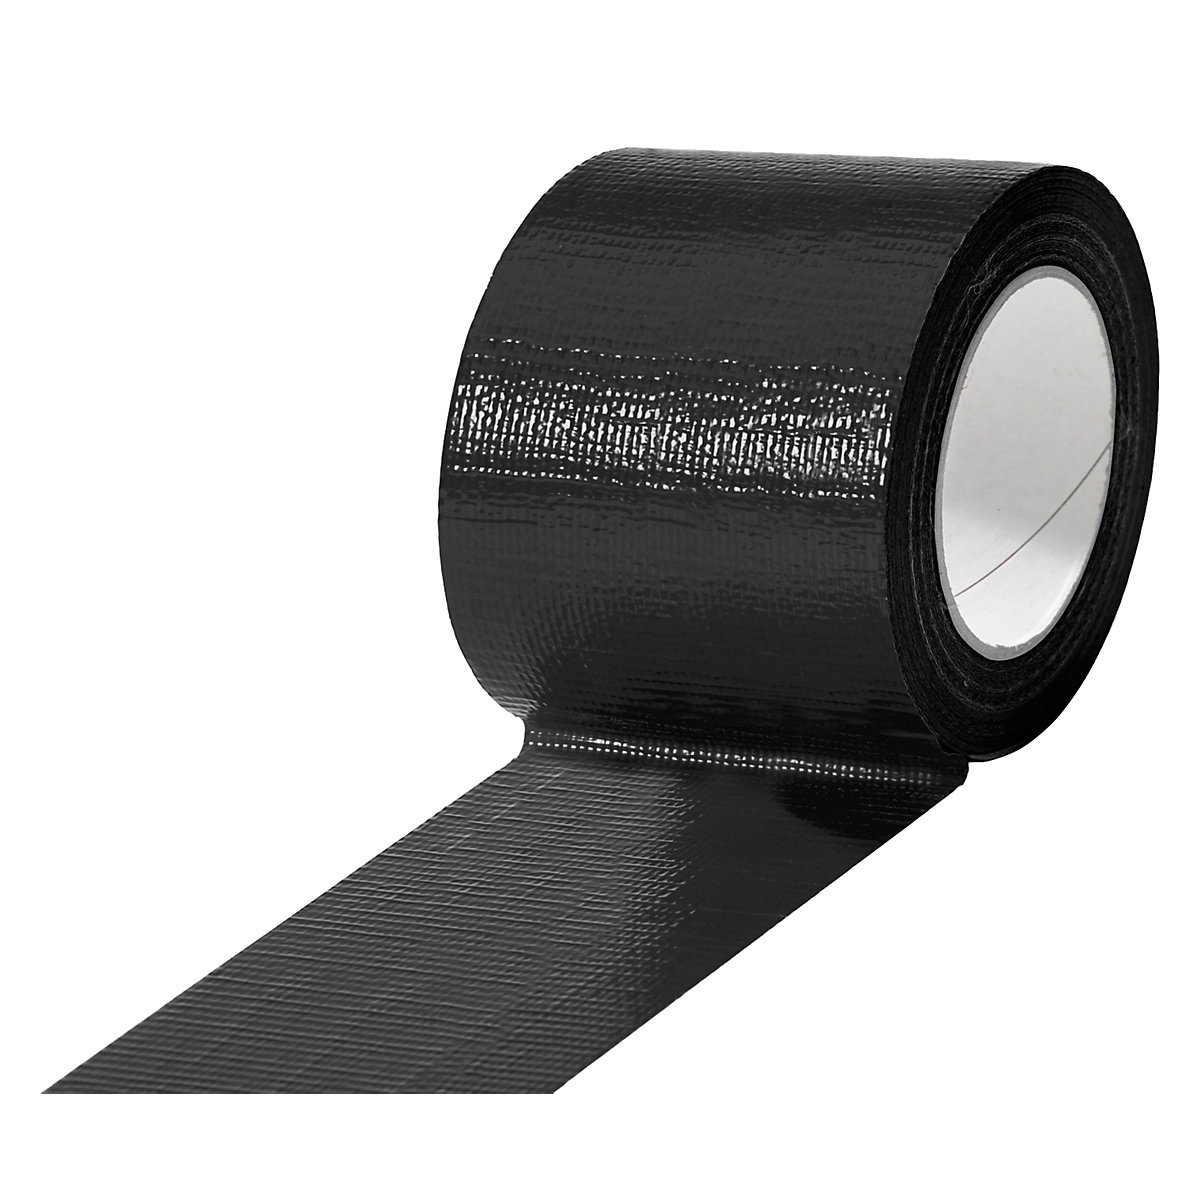 Fabric tape, in different colours, pack of 12 rolls, black, tape width 75 mm-10